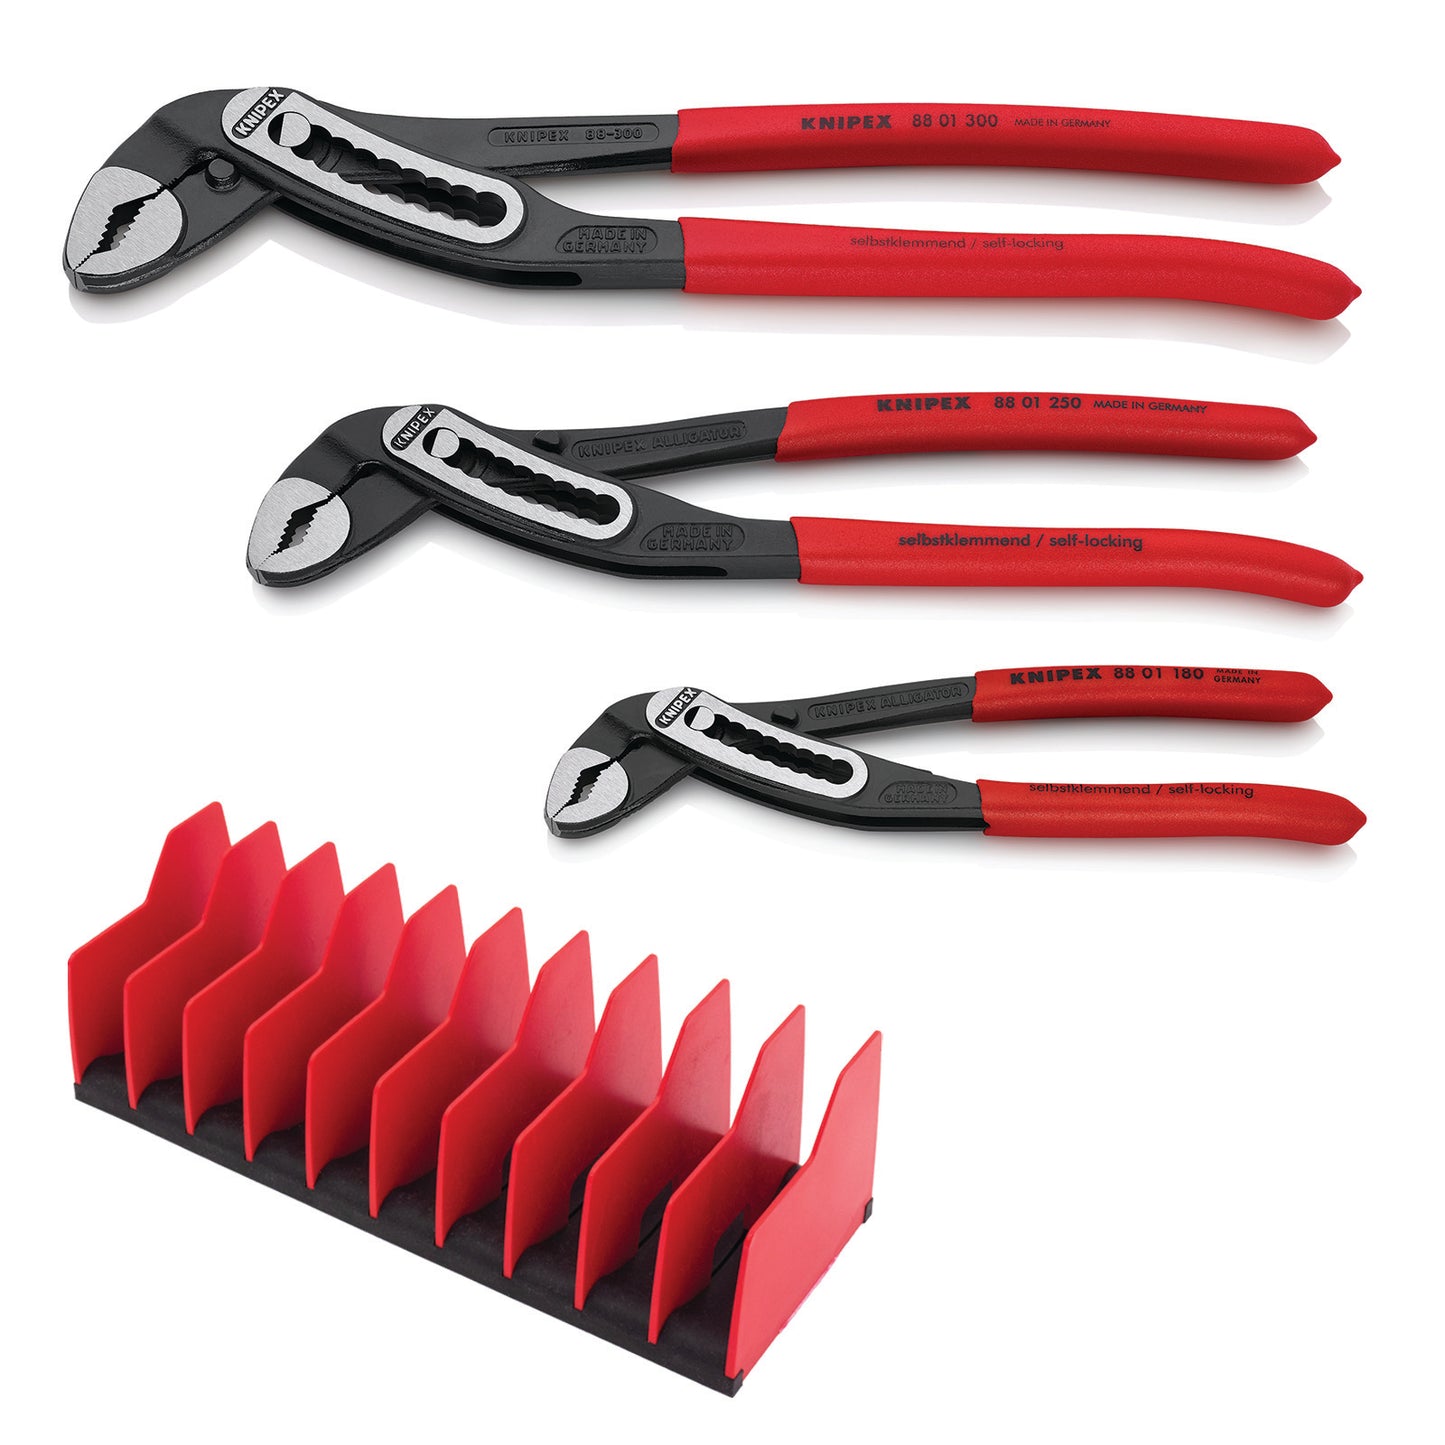 Knipex 3 Piece Alligator® Pliers Set with 10 Piece Tool Holder 9K 00 80 139 US